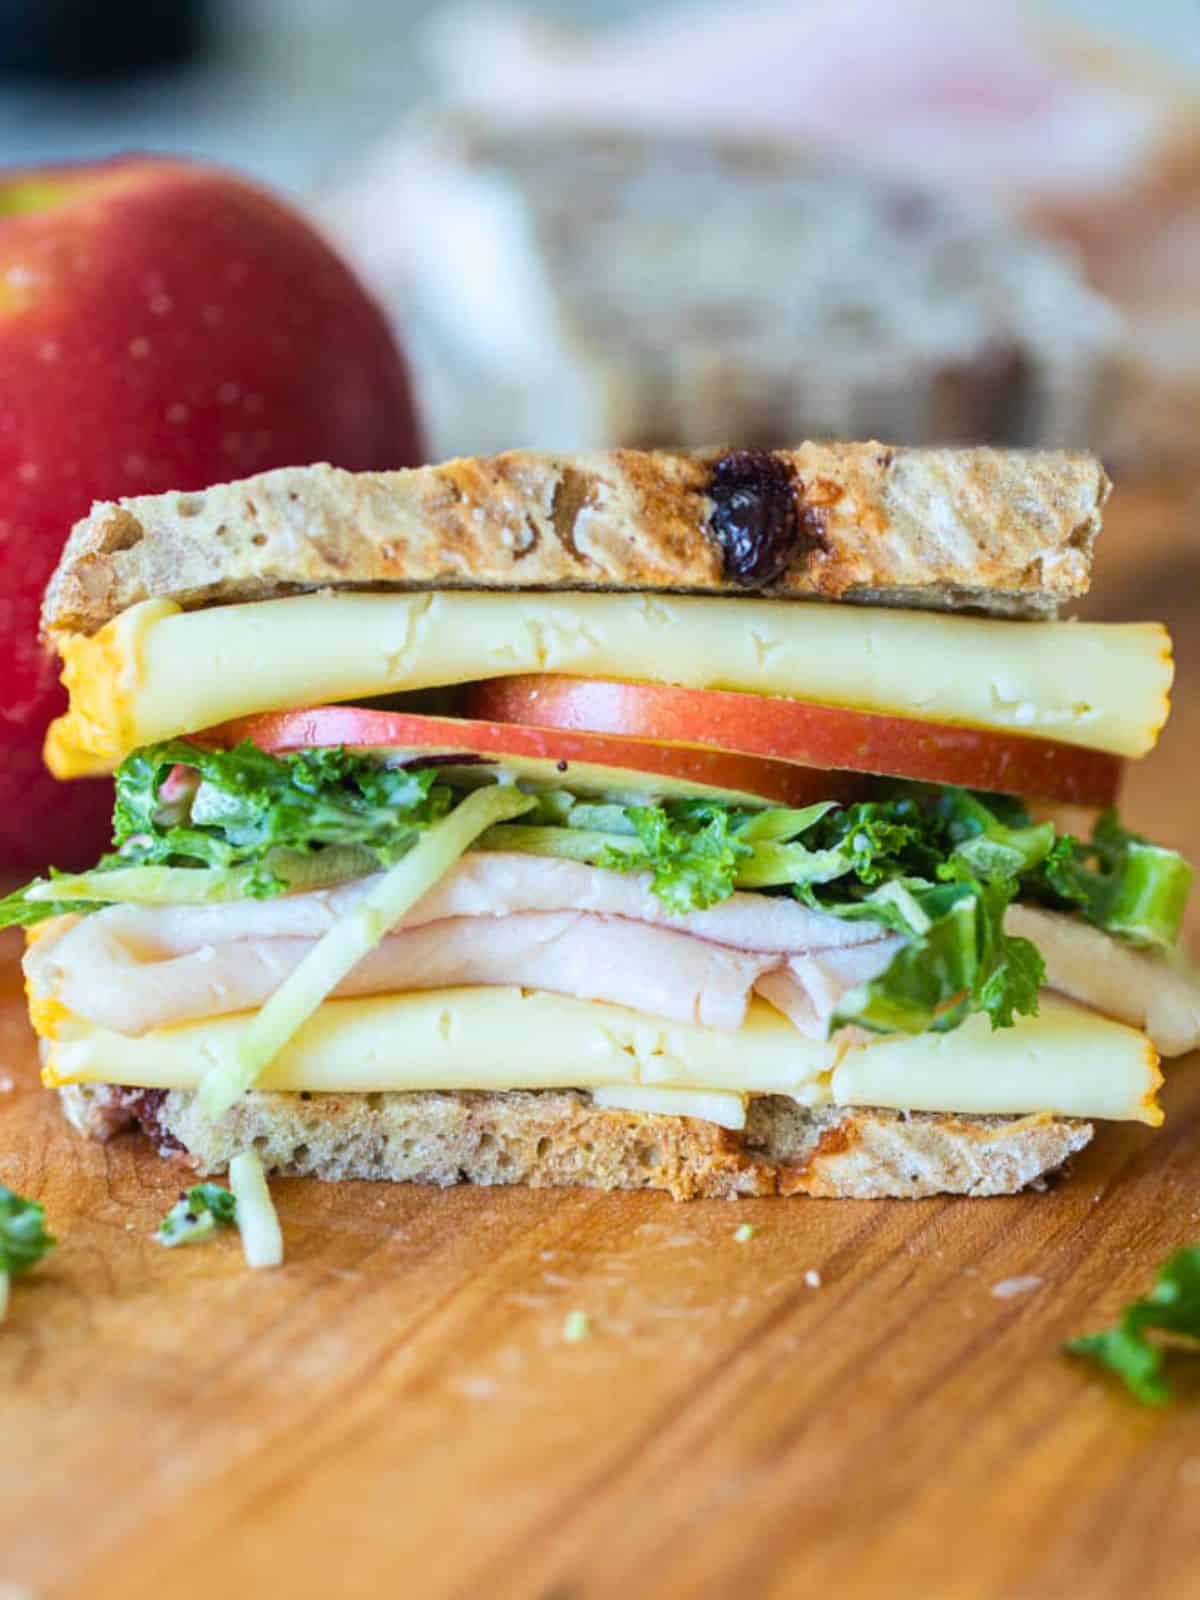 Turkey apple sandwich with white cheddar and kale salad on cutting board.